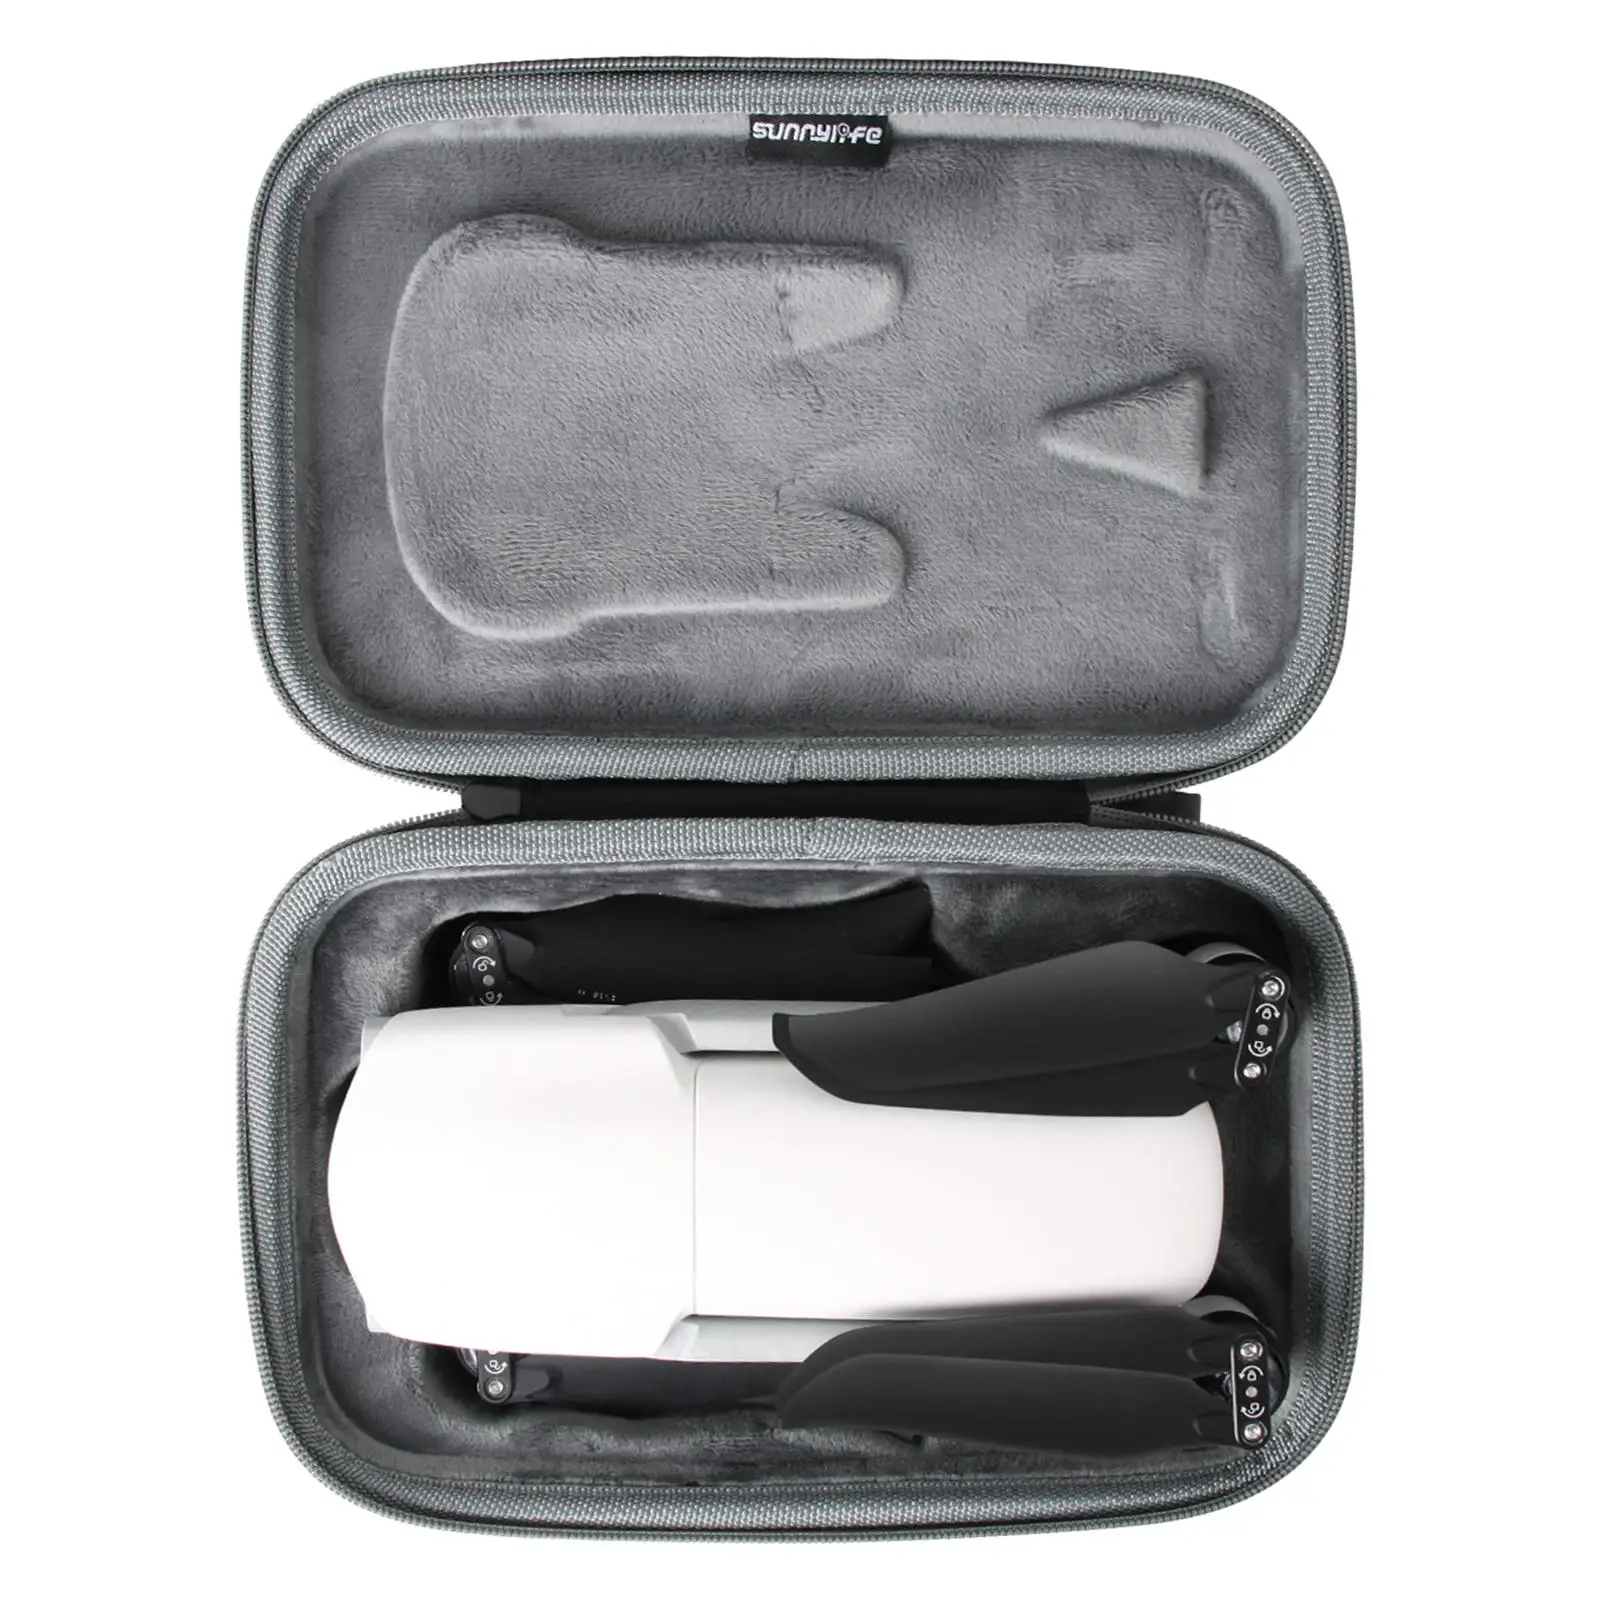 Hard Carrying Case, Mini Drone Body Case Protective Shockproof Handbag with Hook